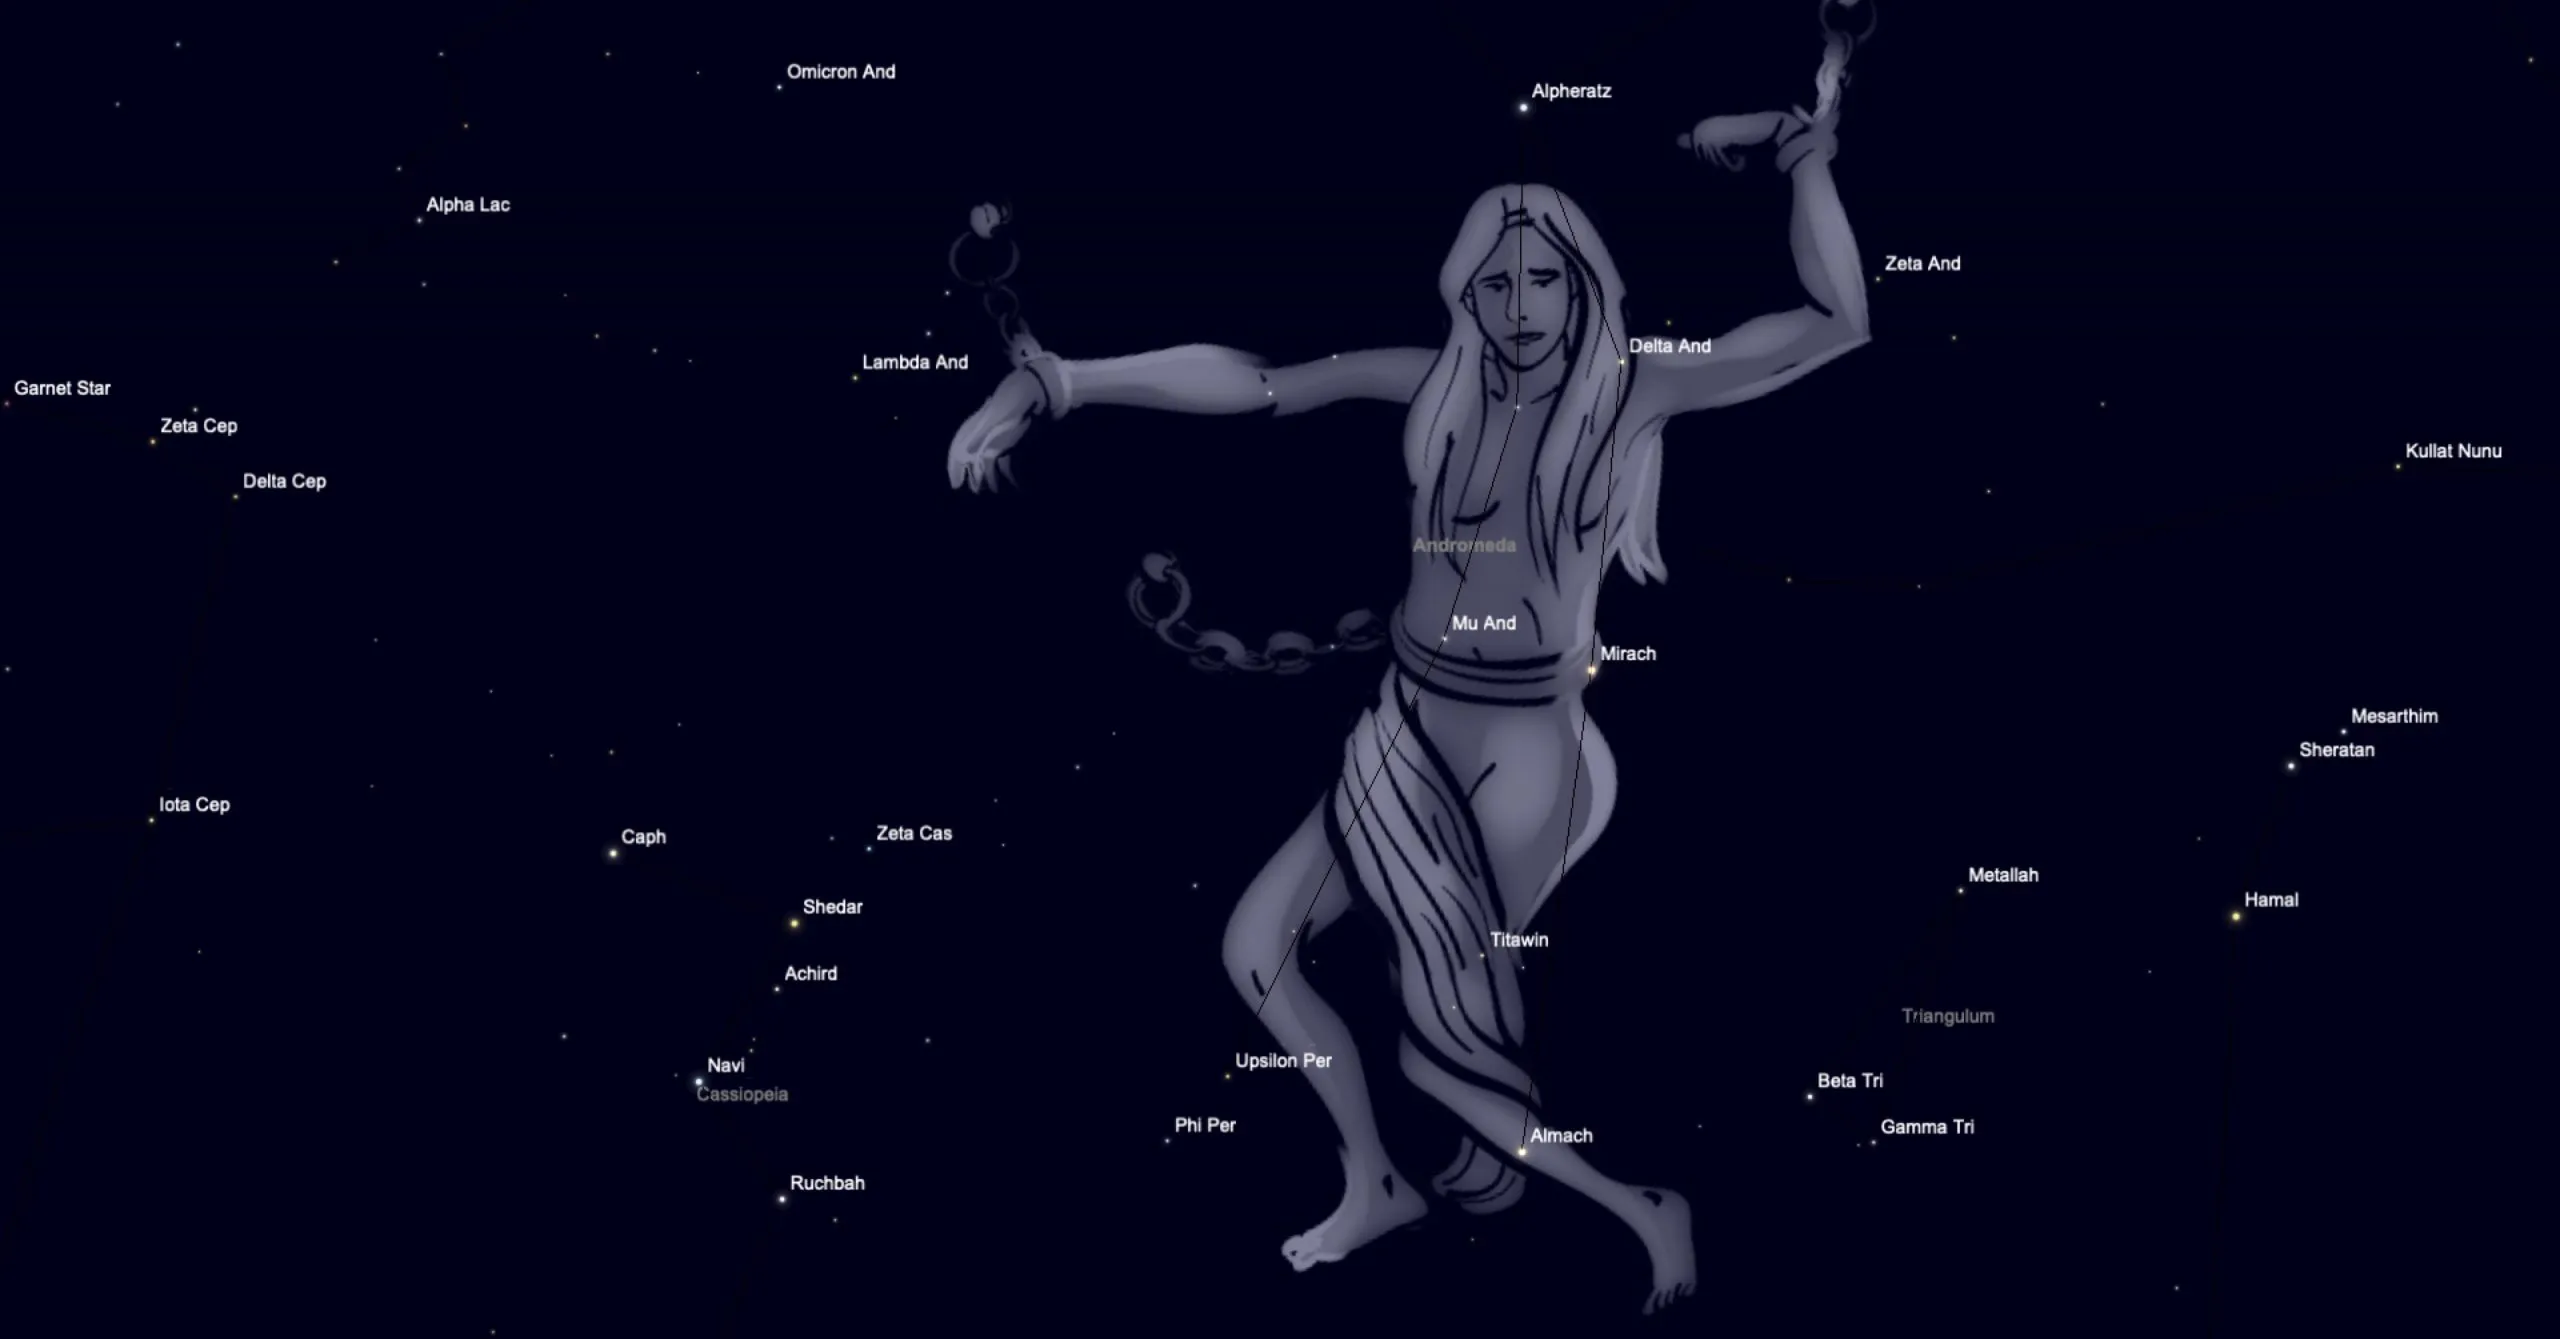 The mythical figure of Andromeda the chained princess overlaid against the constellation's stars